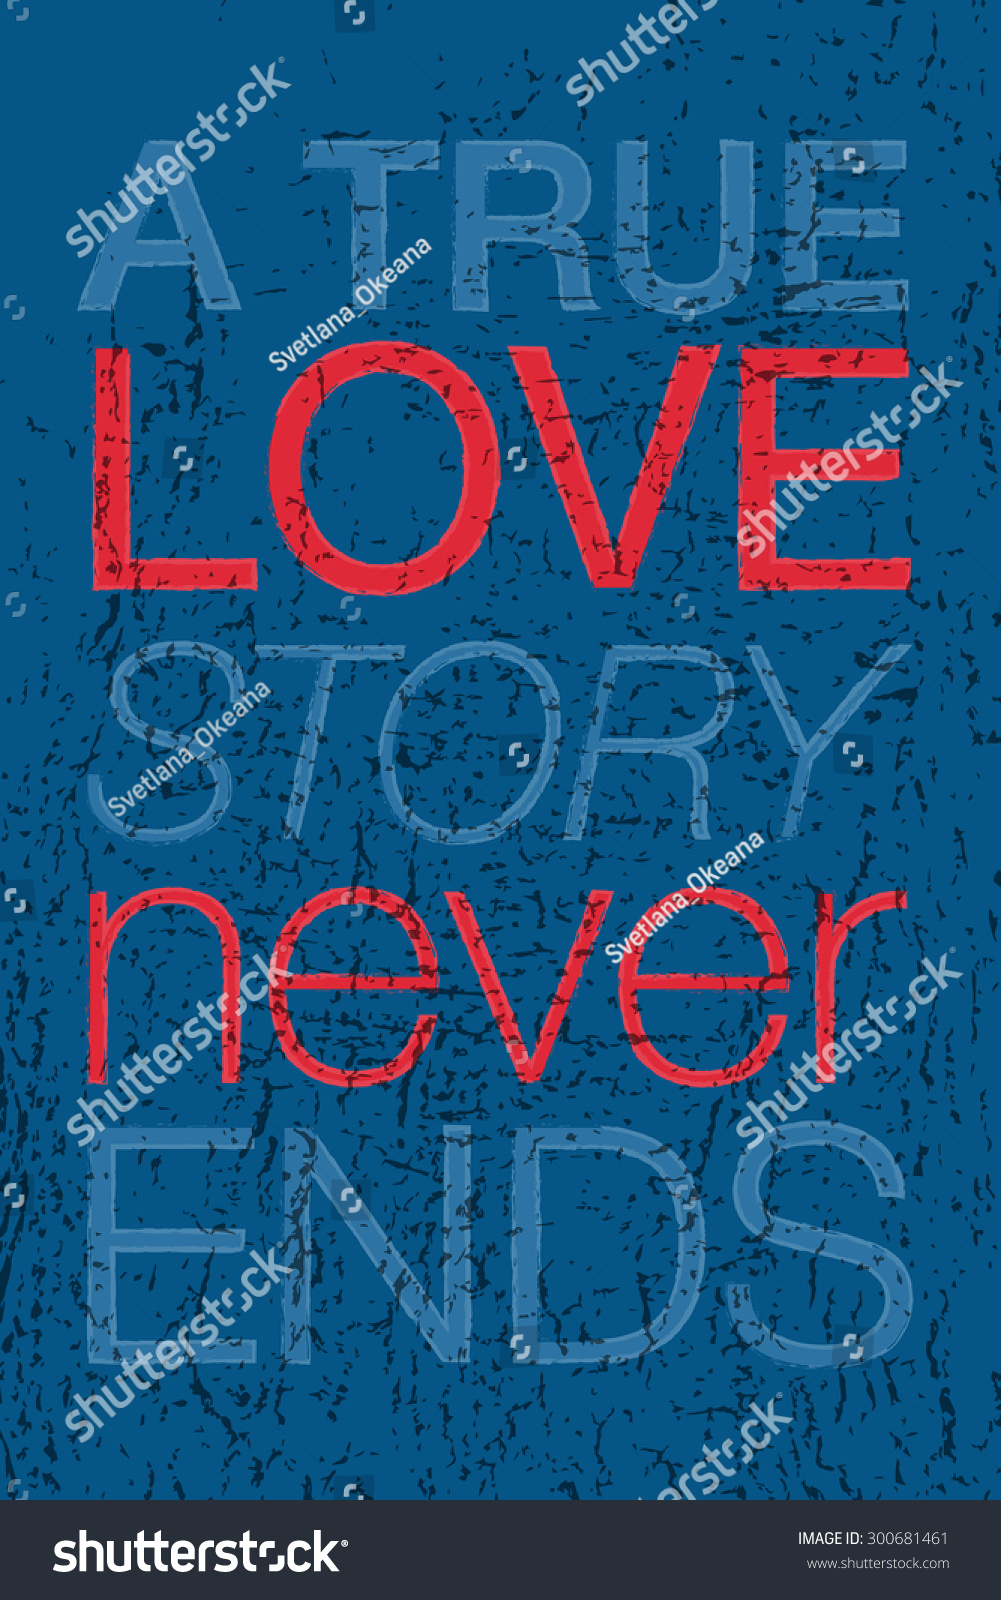 Romantic quote "A true love story never ends" on